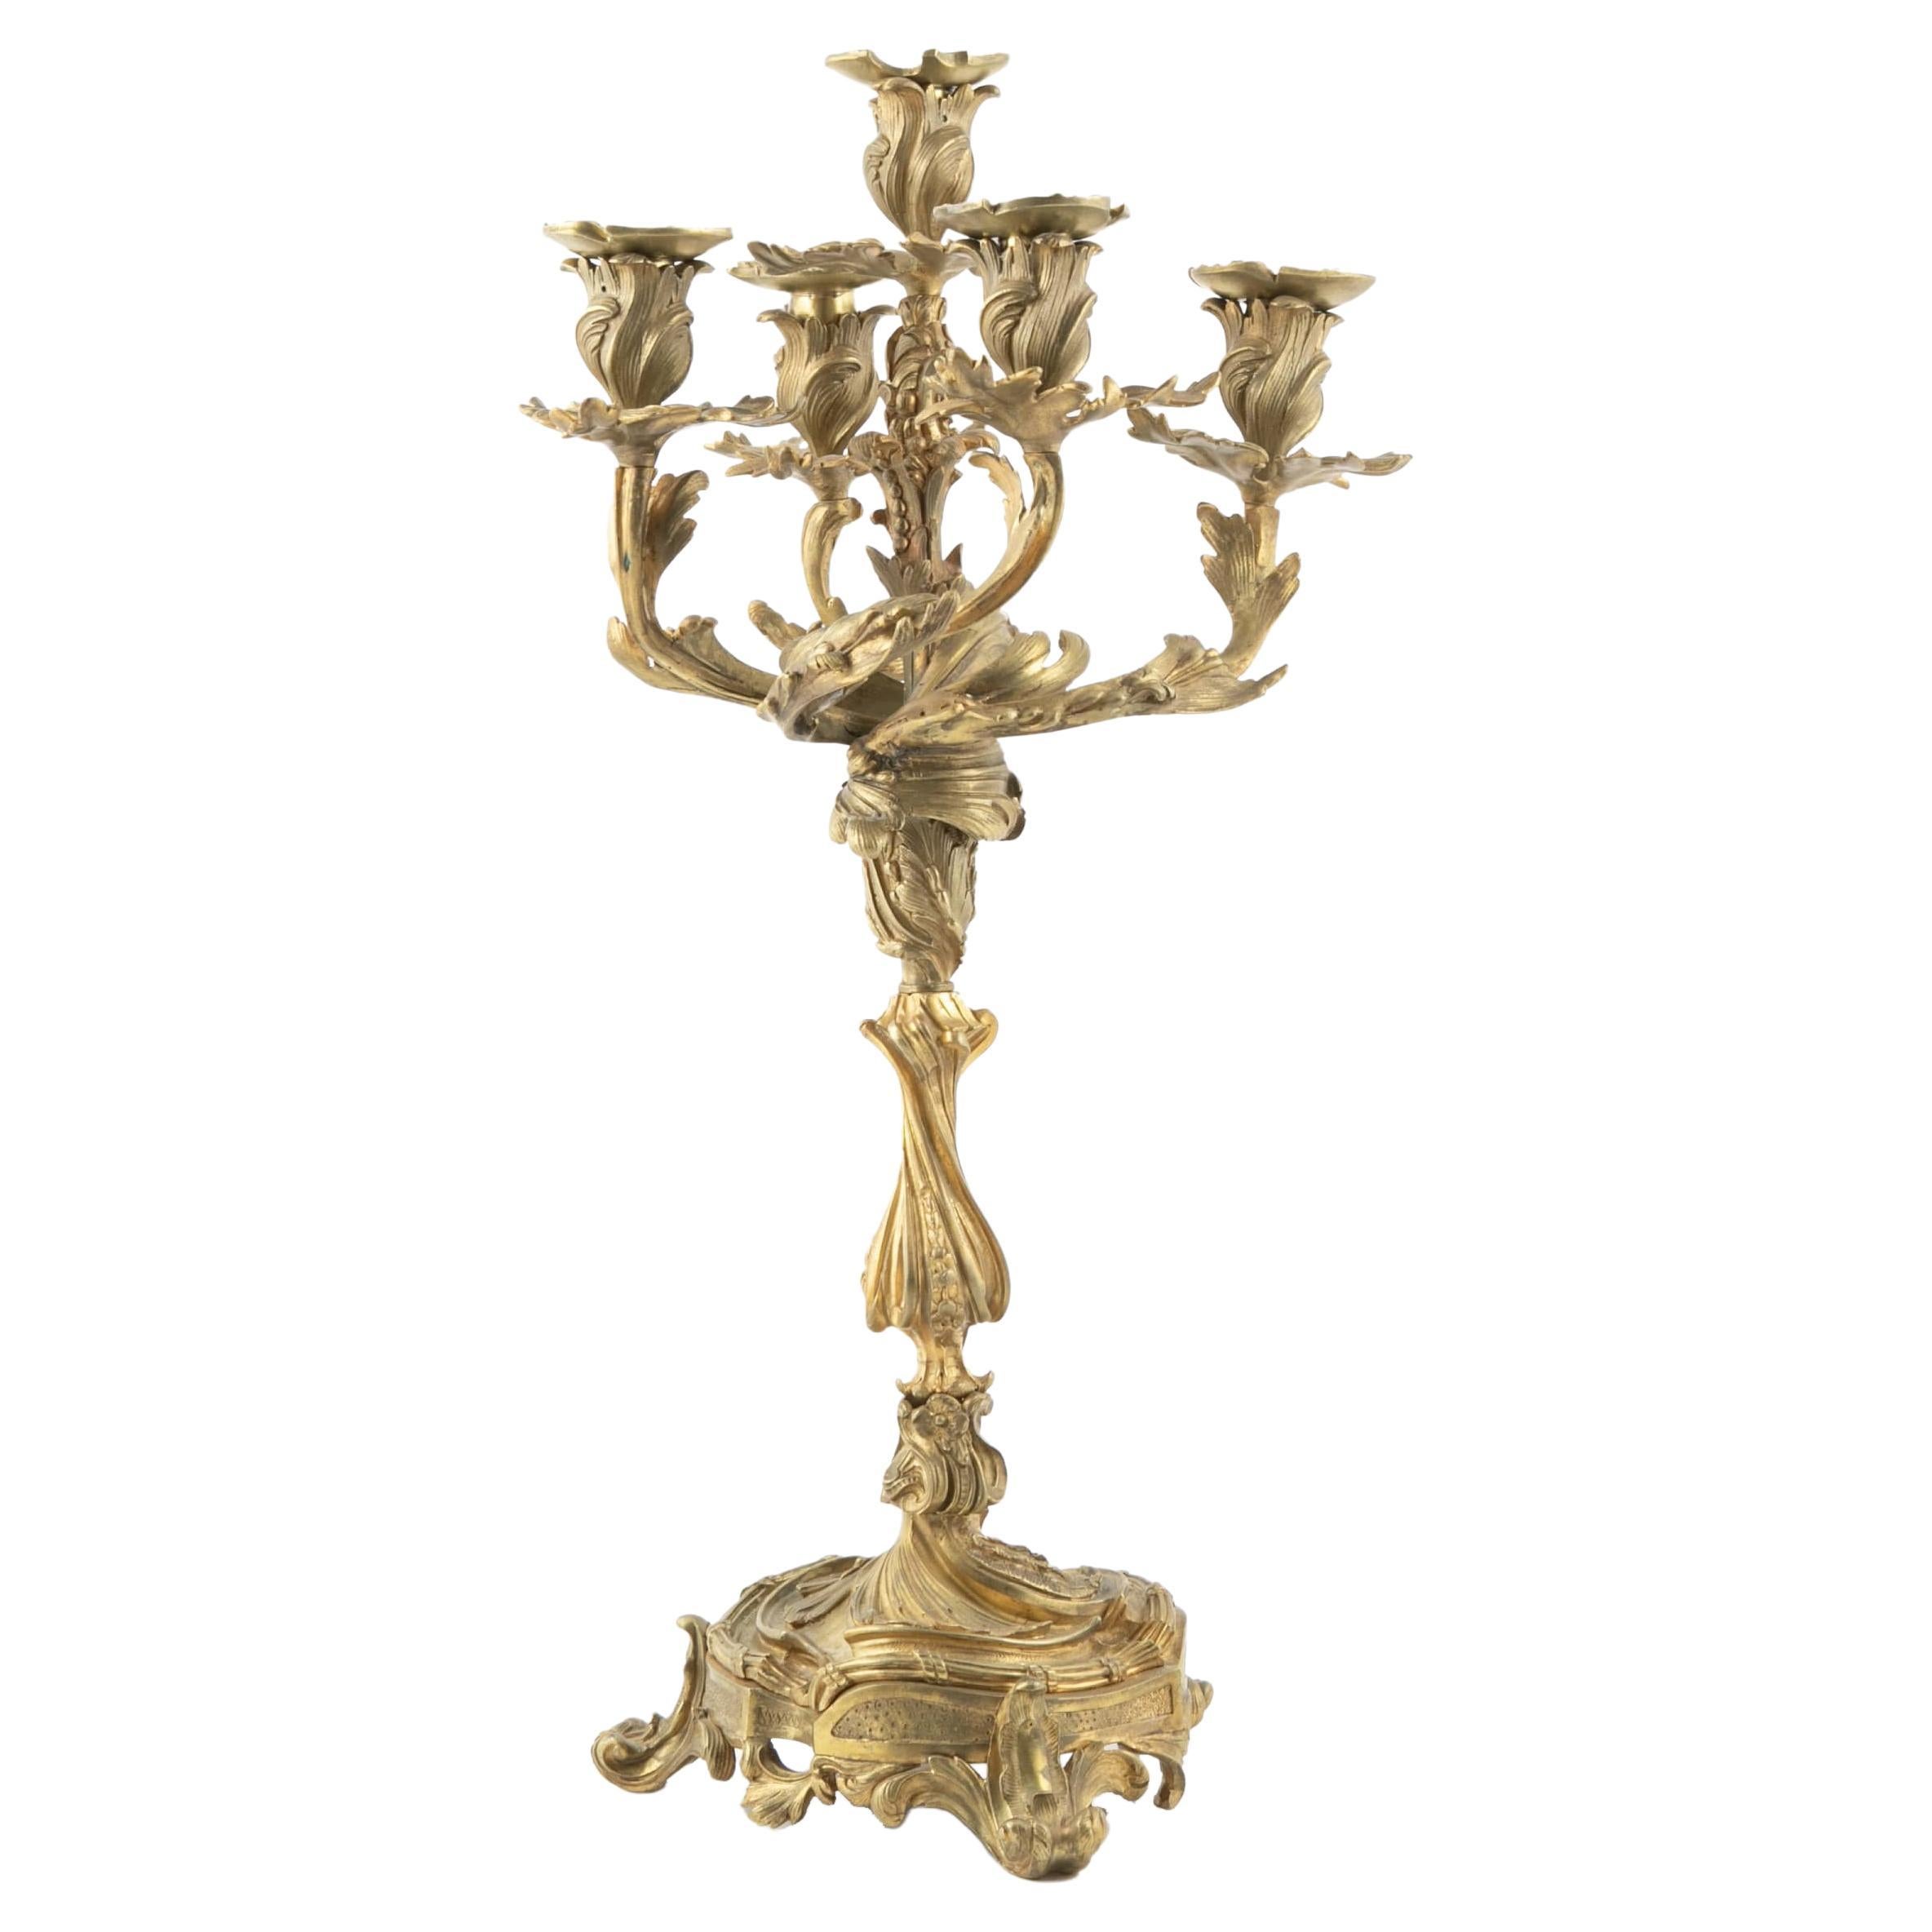 Antique French New Rococo Gilt Bronze Candelabra with 5 Arms